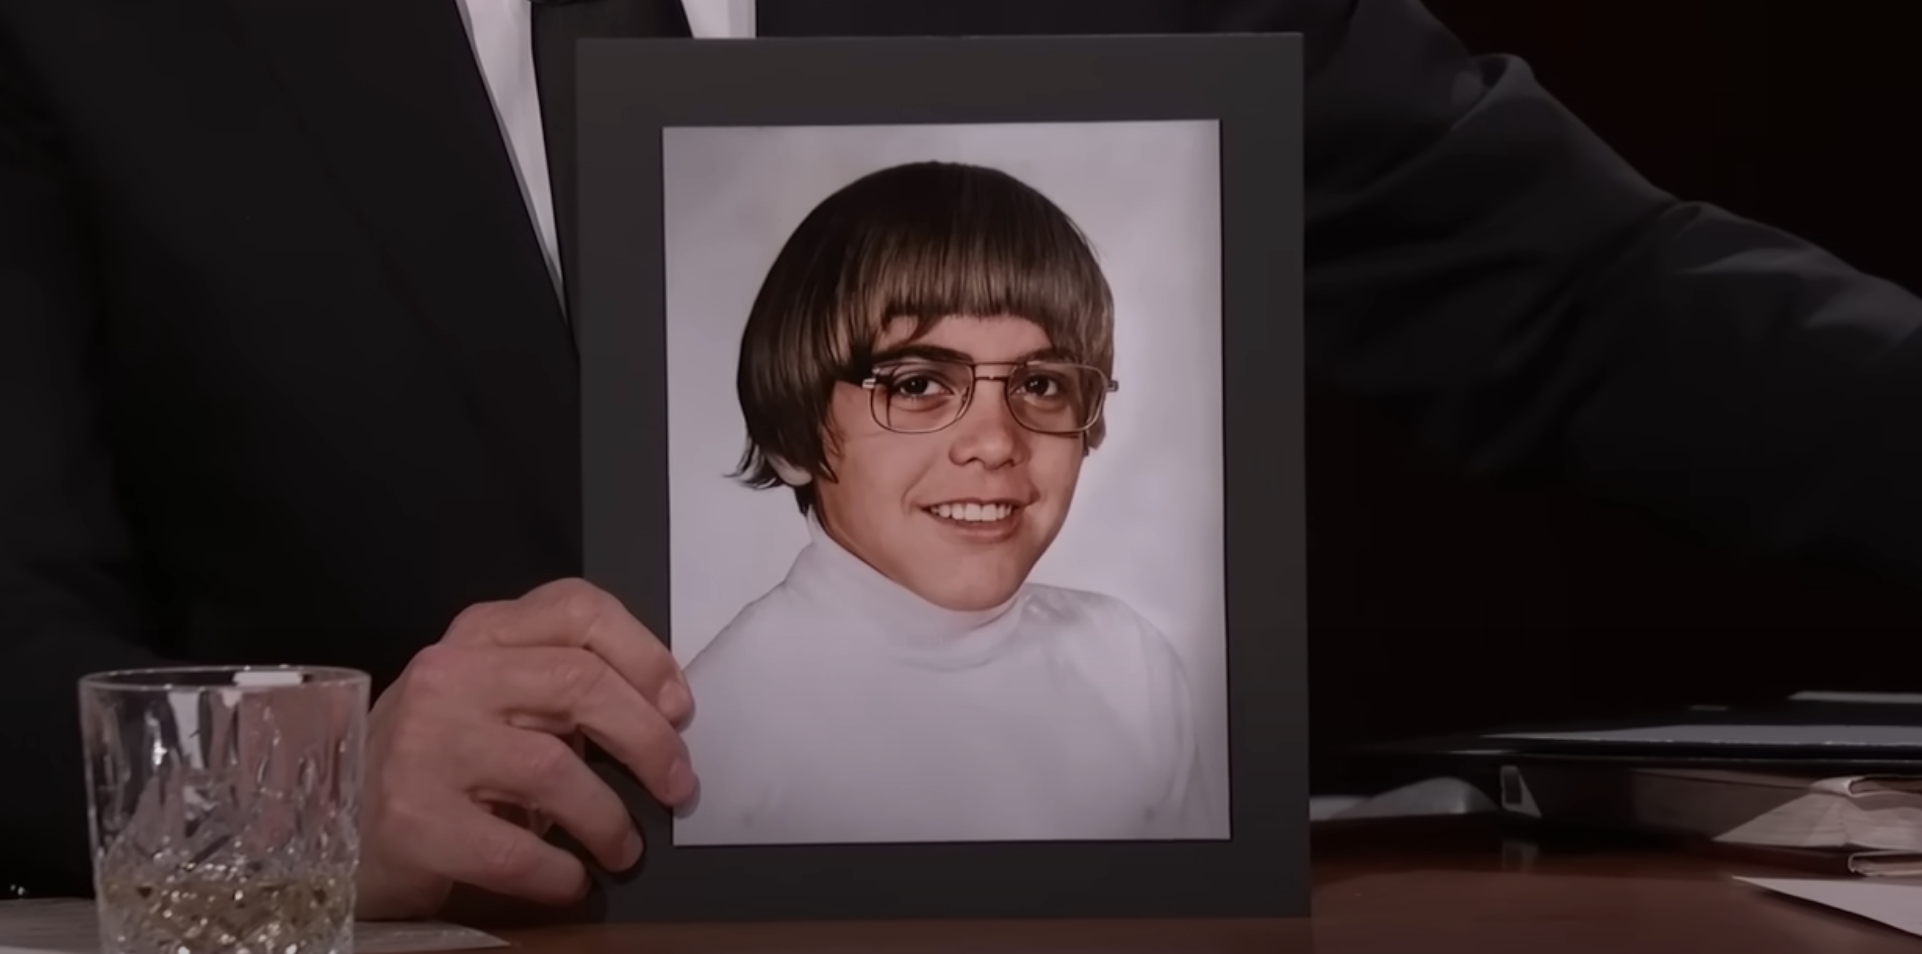 clooney wearing a turtleneck, glasses, and a bowl cut with shorter uneven bangs